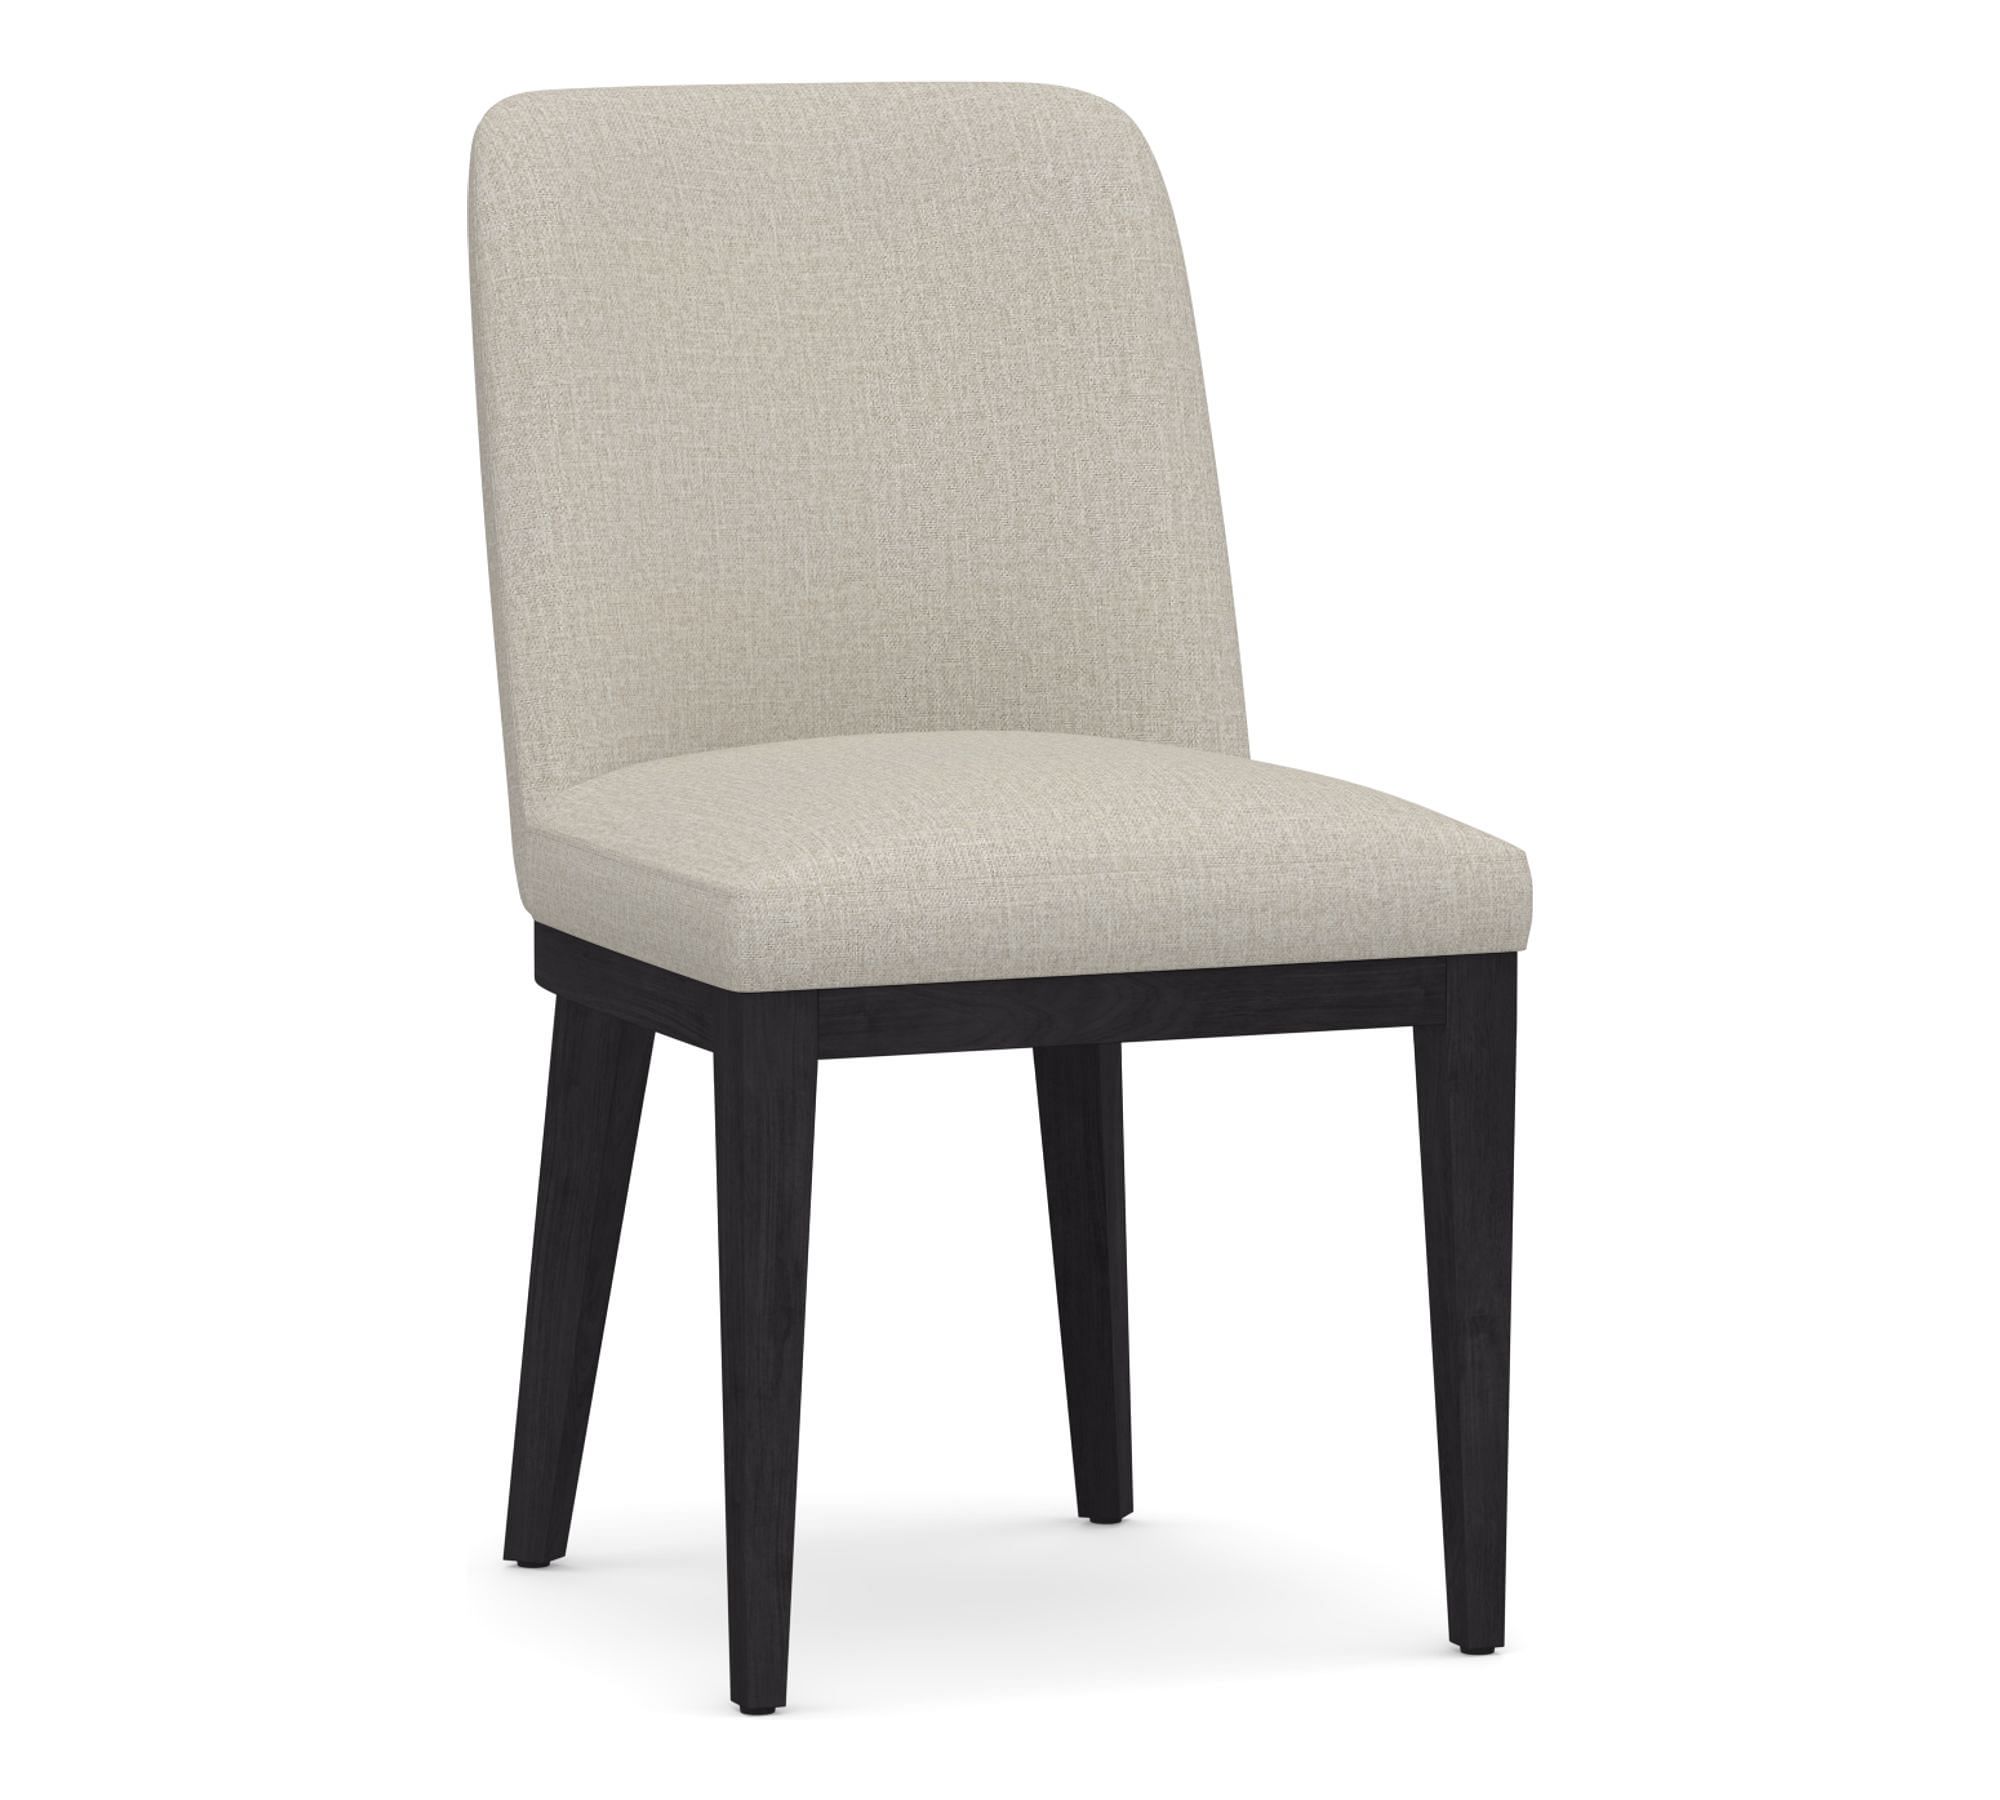 Open Box: Layton Upholstered Dining Chair